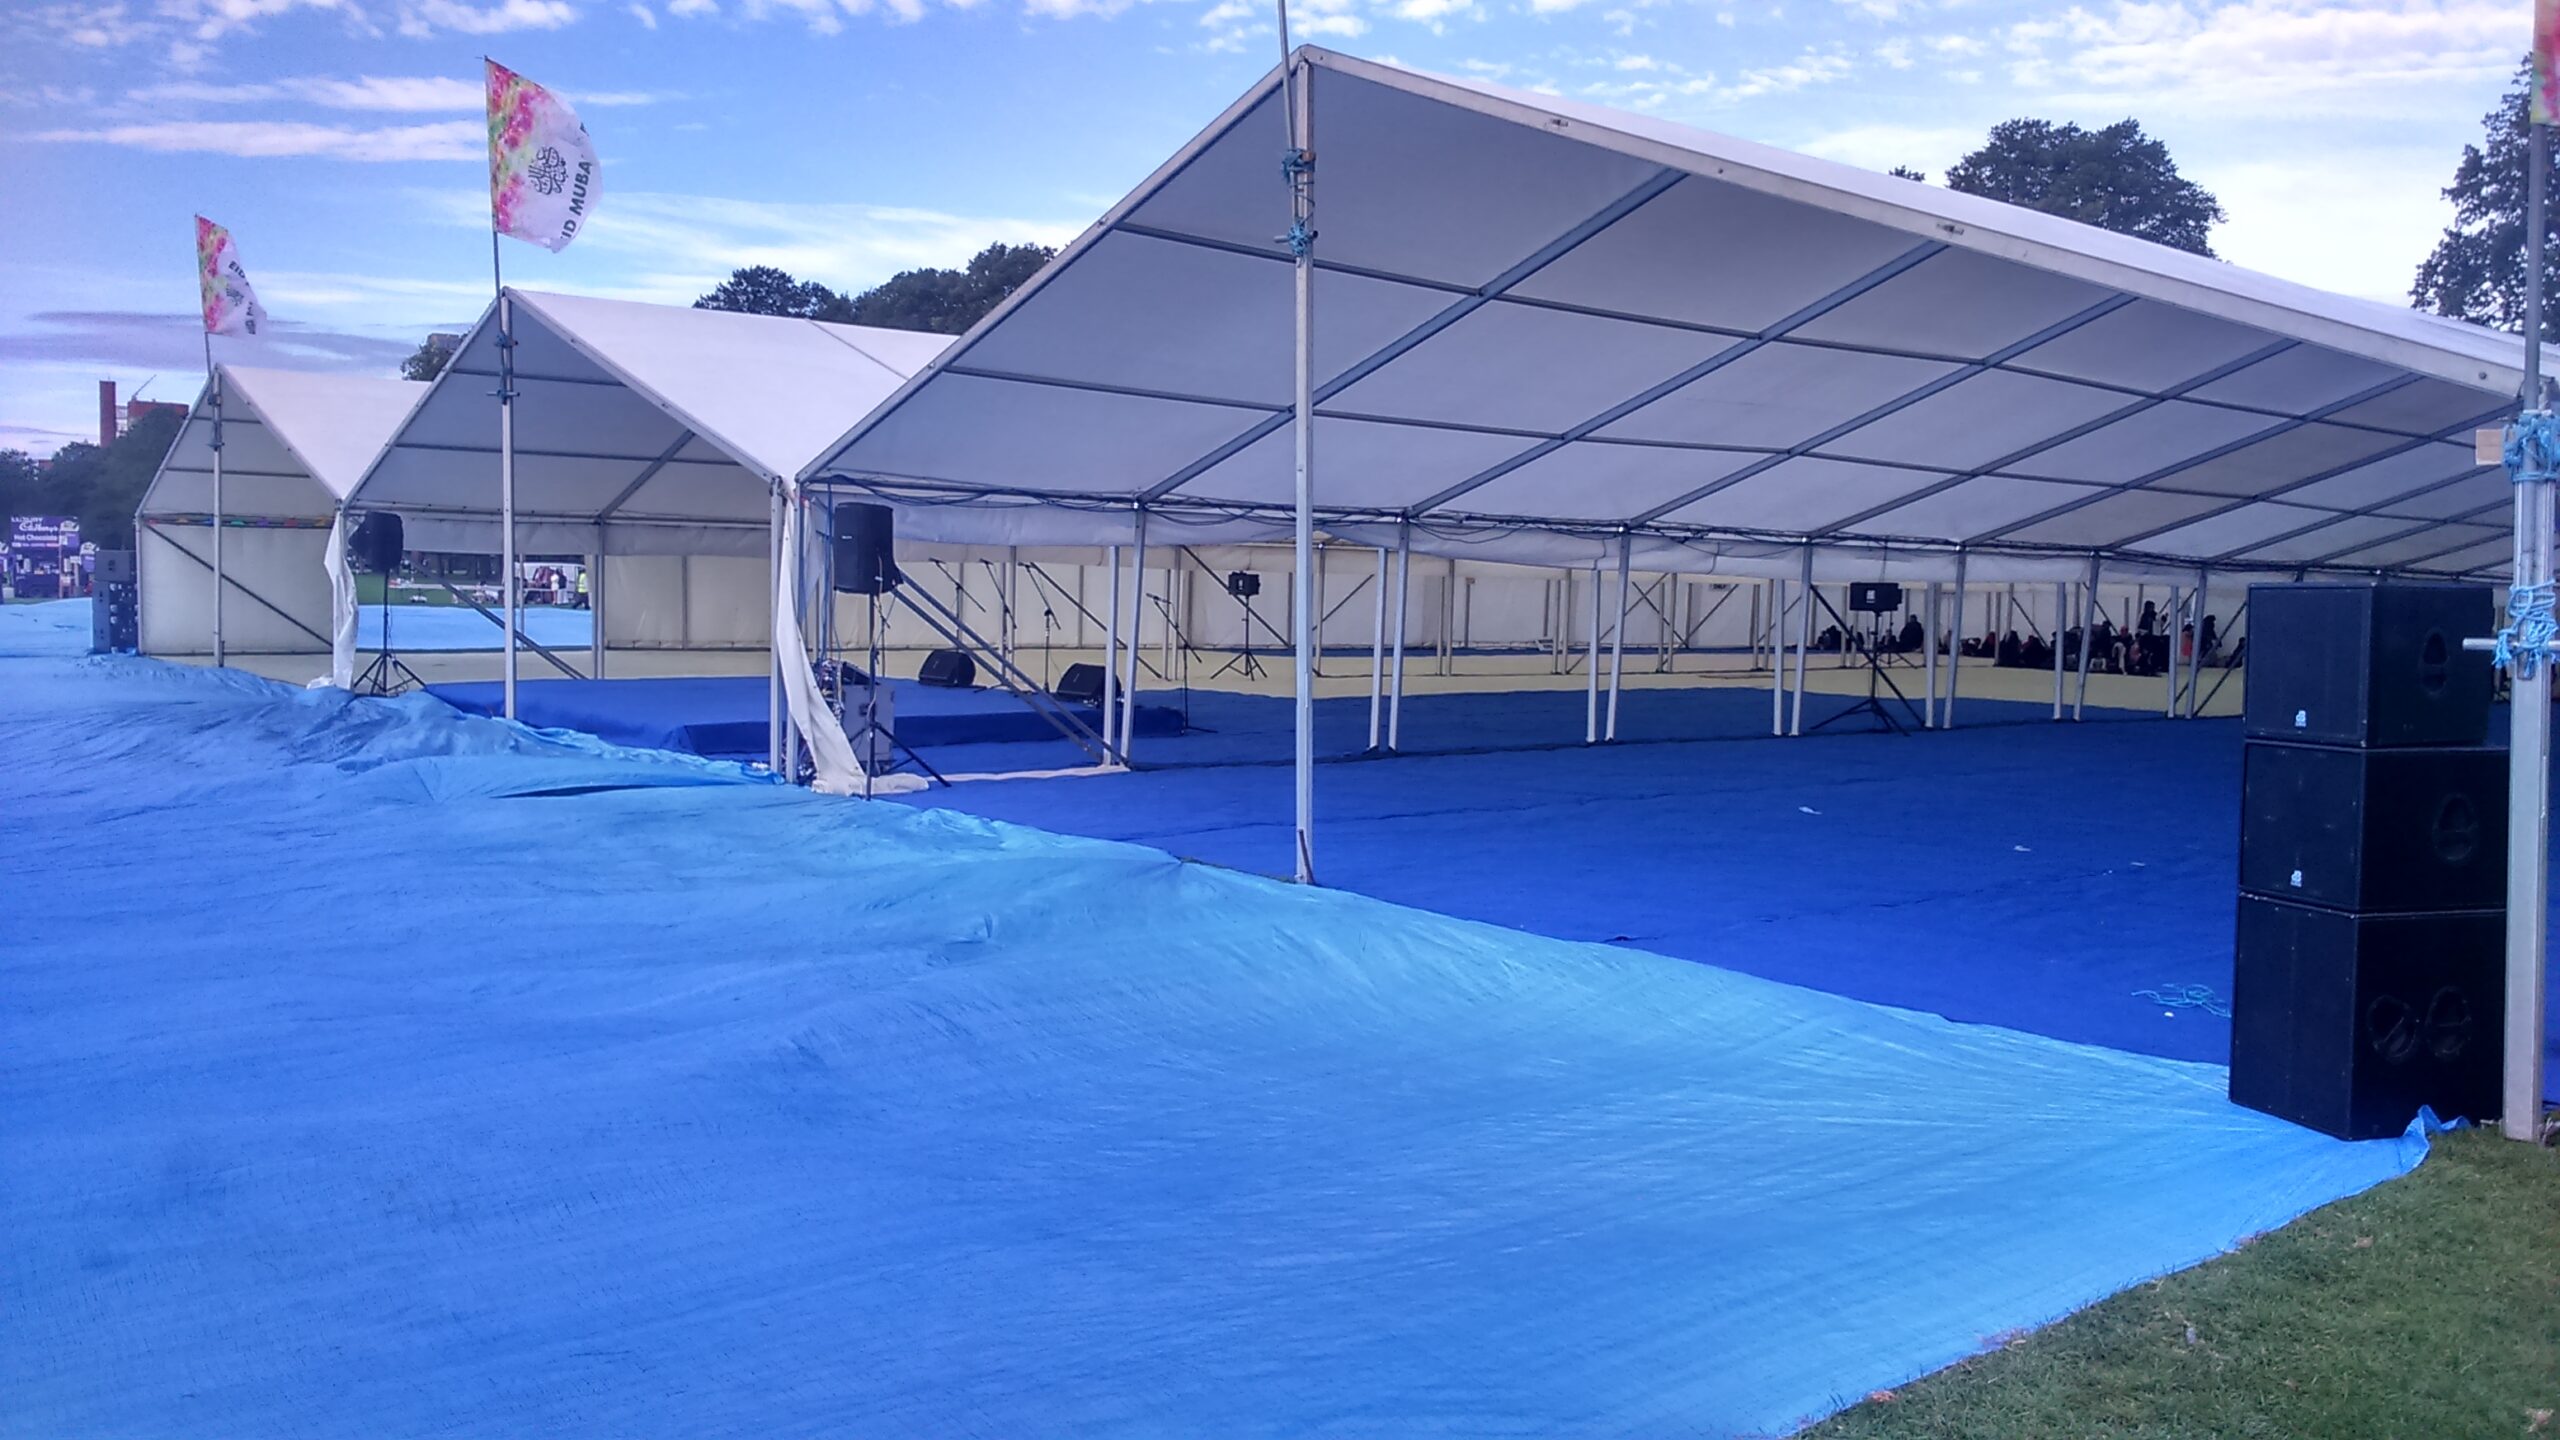 EES Showhire provide bespoke outdoor PA hire solutions for events and marquees